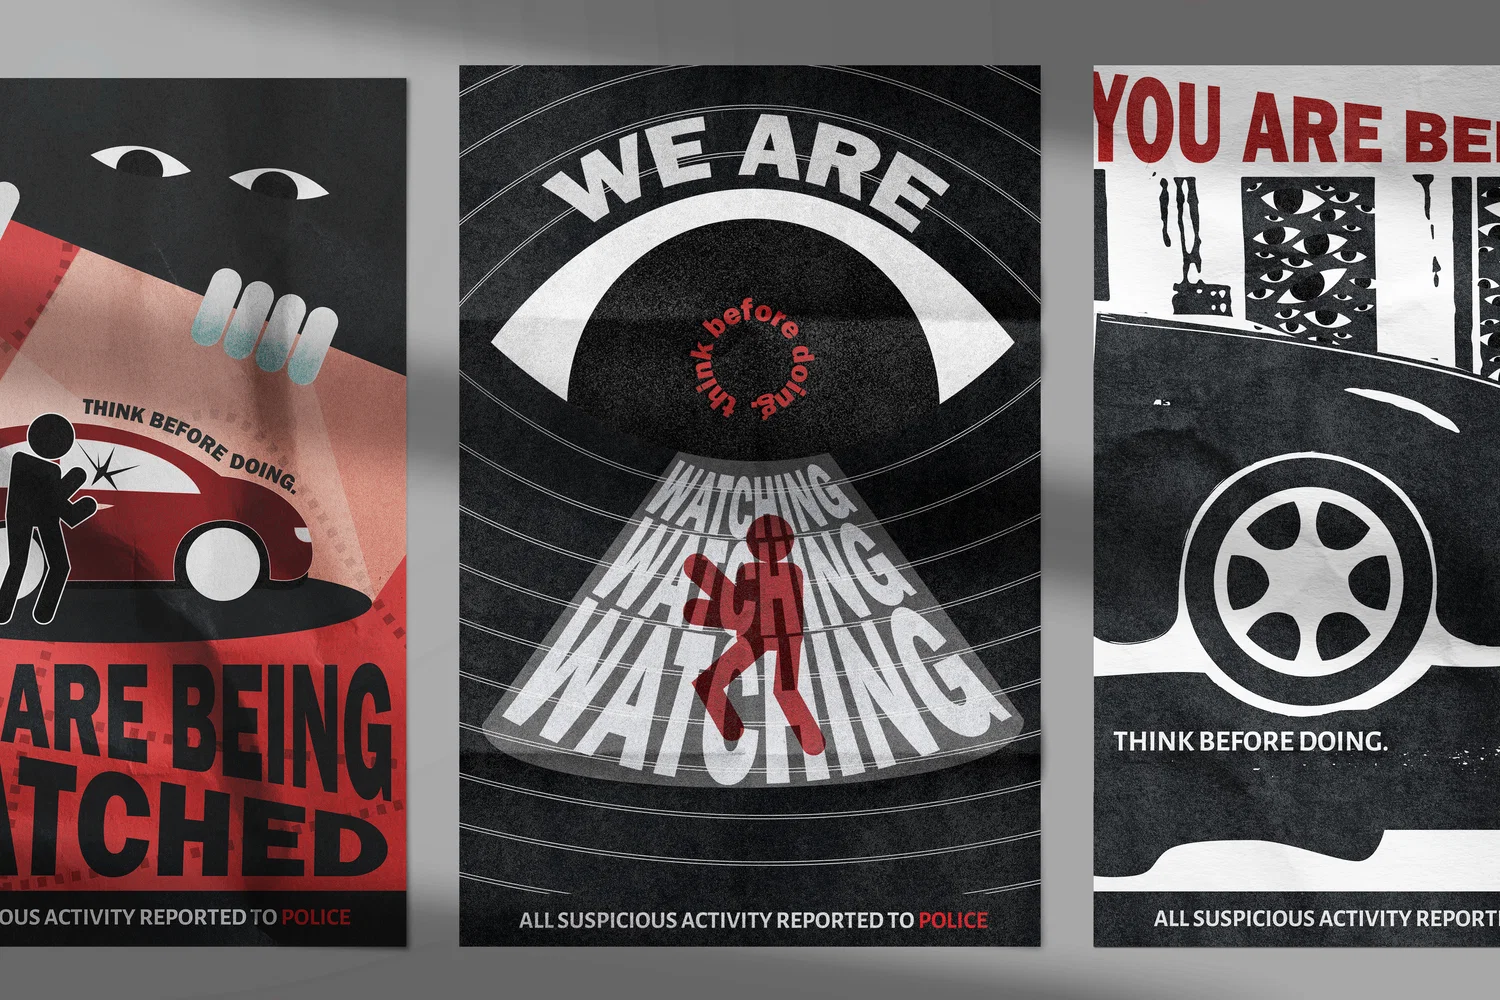 3 posters side by side. Mainly of red and black accents with eyes featured all over them.